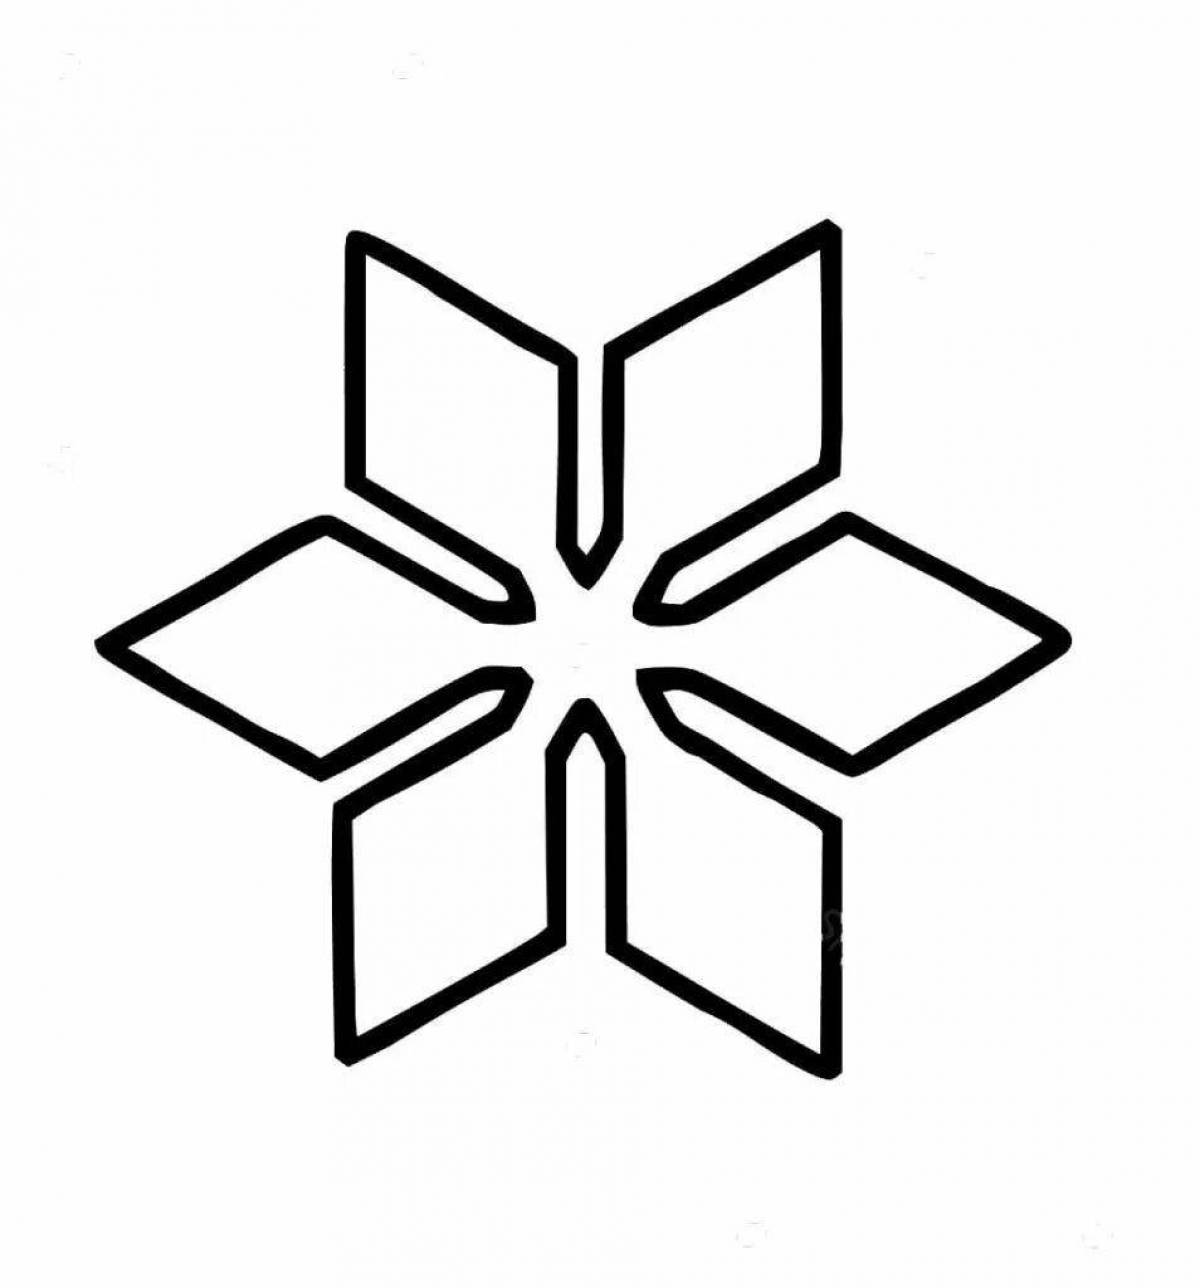 Glitter snowflake coloring pages for 4-5 year olds in kindergarten